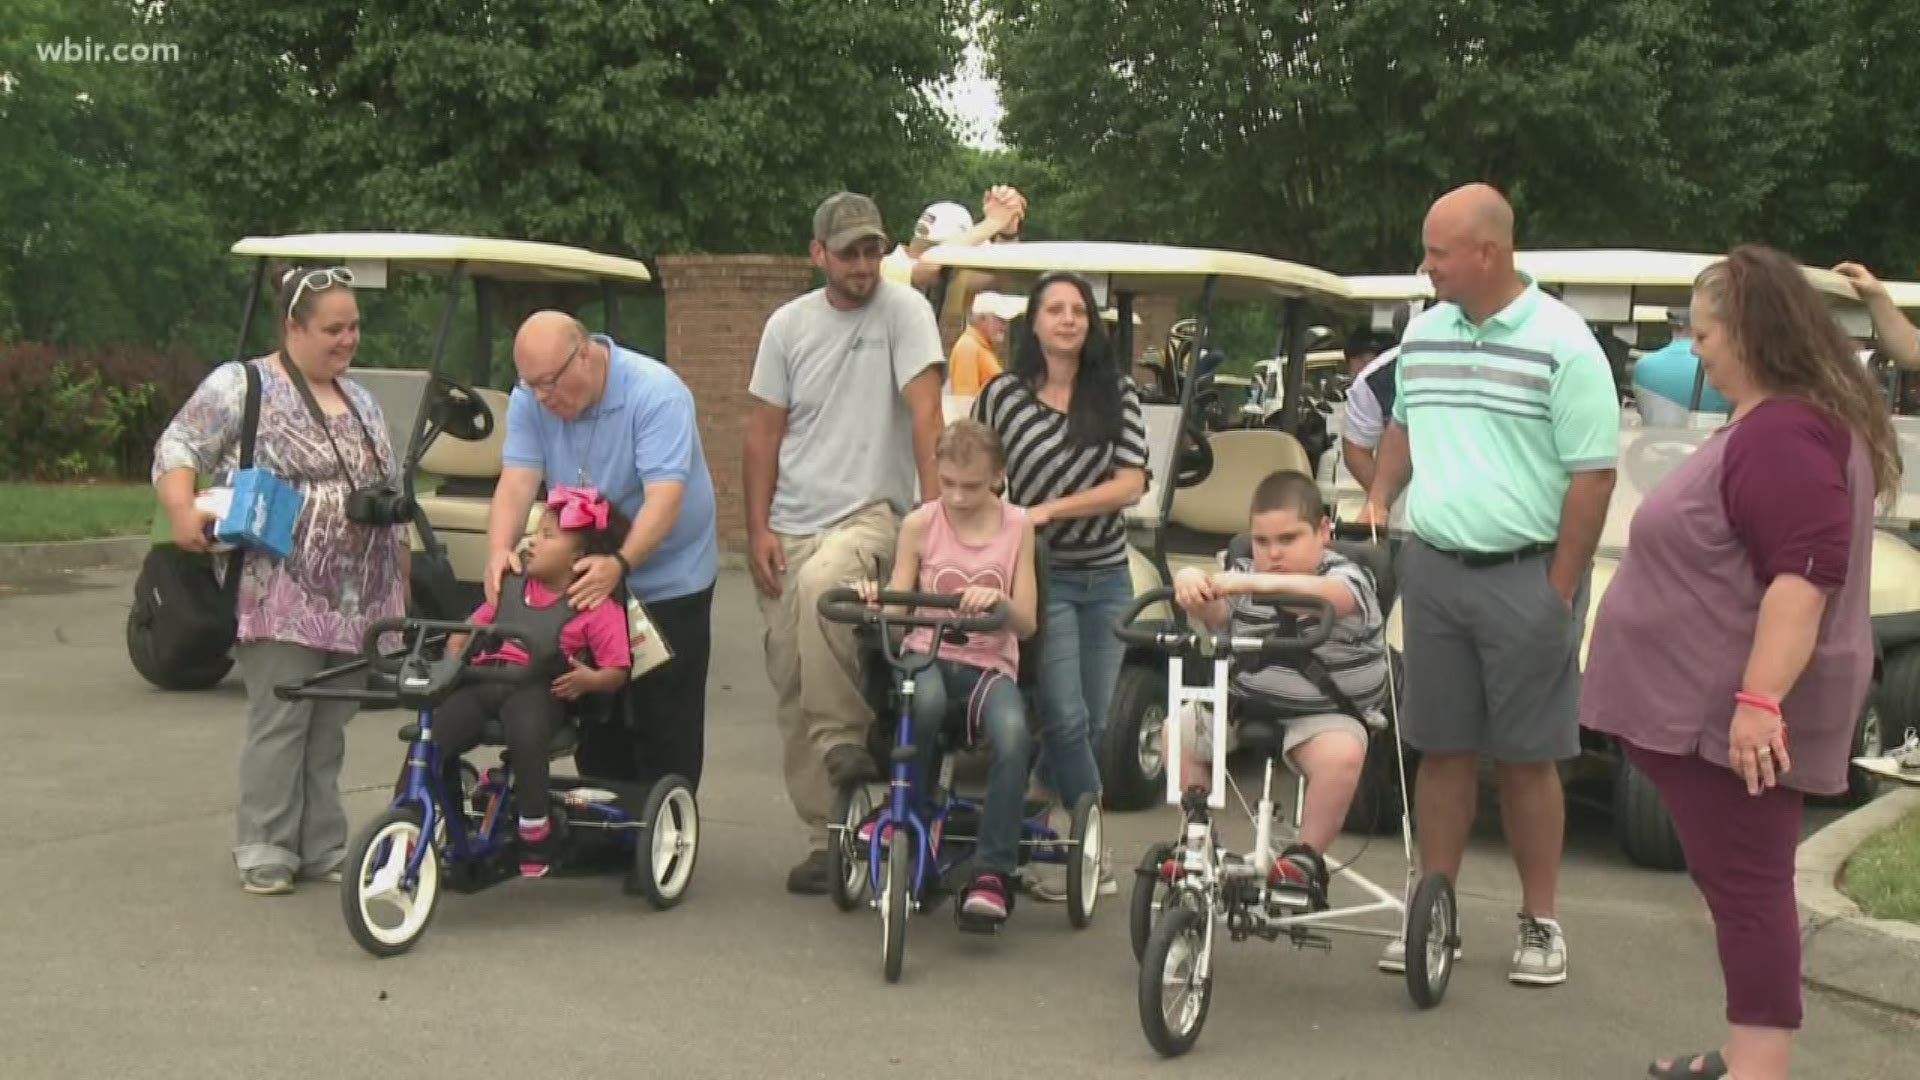 Coach Jeremy Pruitt traded in his football gear for something to golf in, and it was all for a sweet cause.